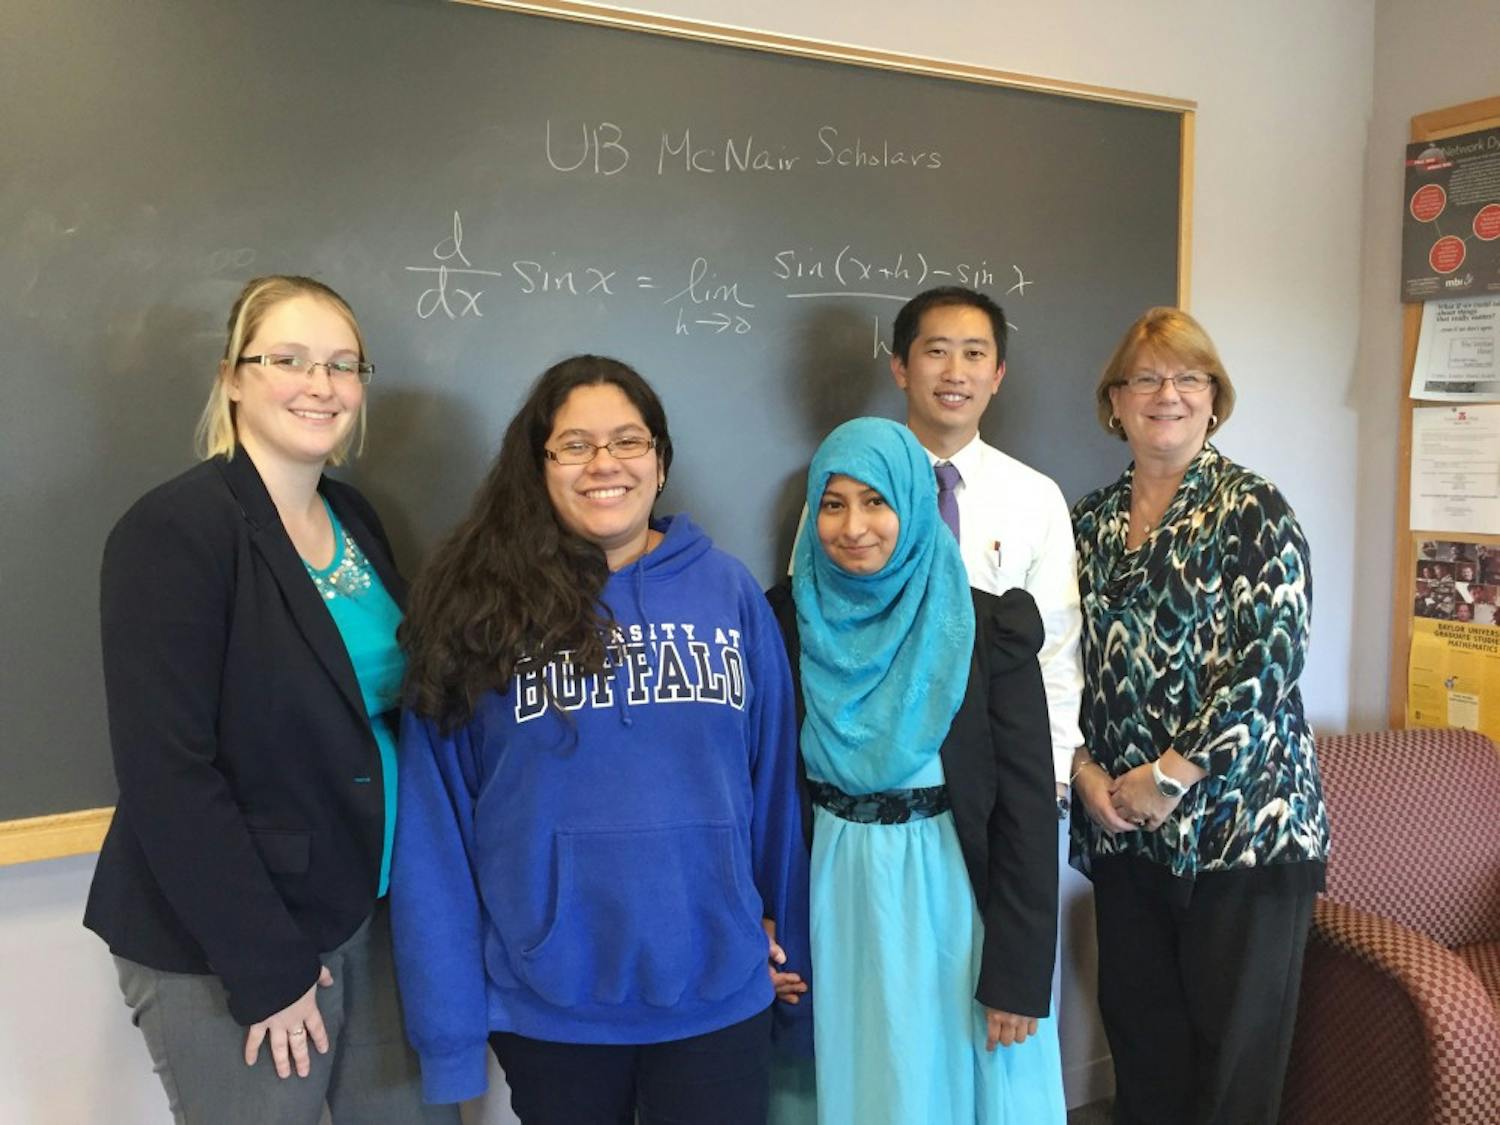 (Left to right) Heather Hagenbuch, Valerie Tapia, Nadia Syeda, Chris Yuen, Susan Ott. Tapia and Syeda are two McNair Scholars whose work has been recognized among professionals in their fields.